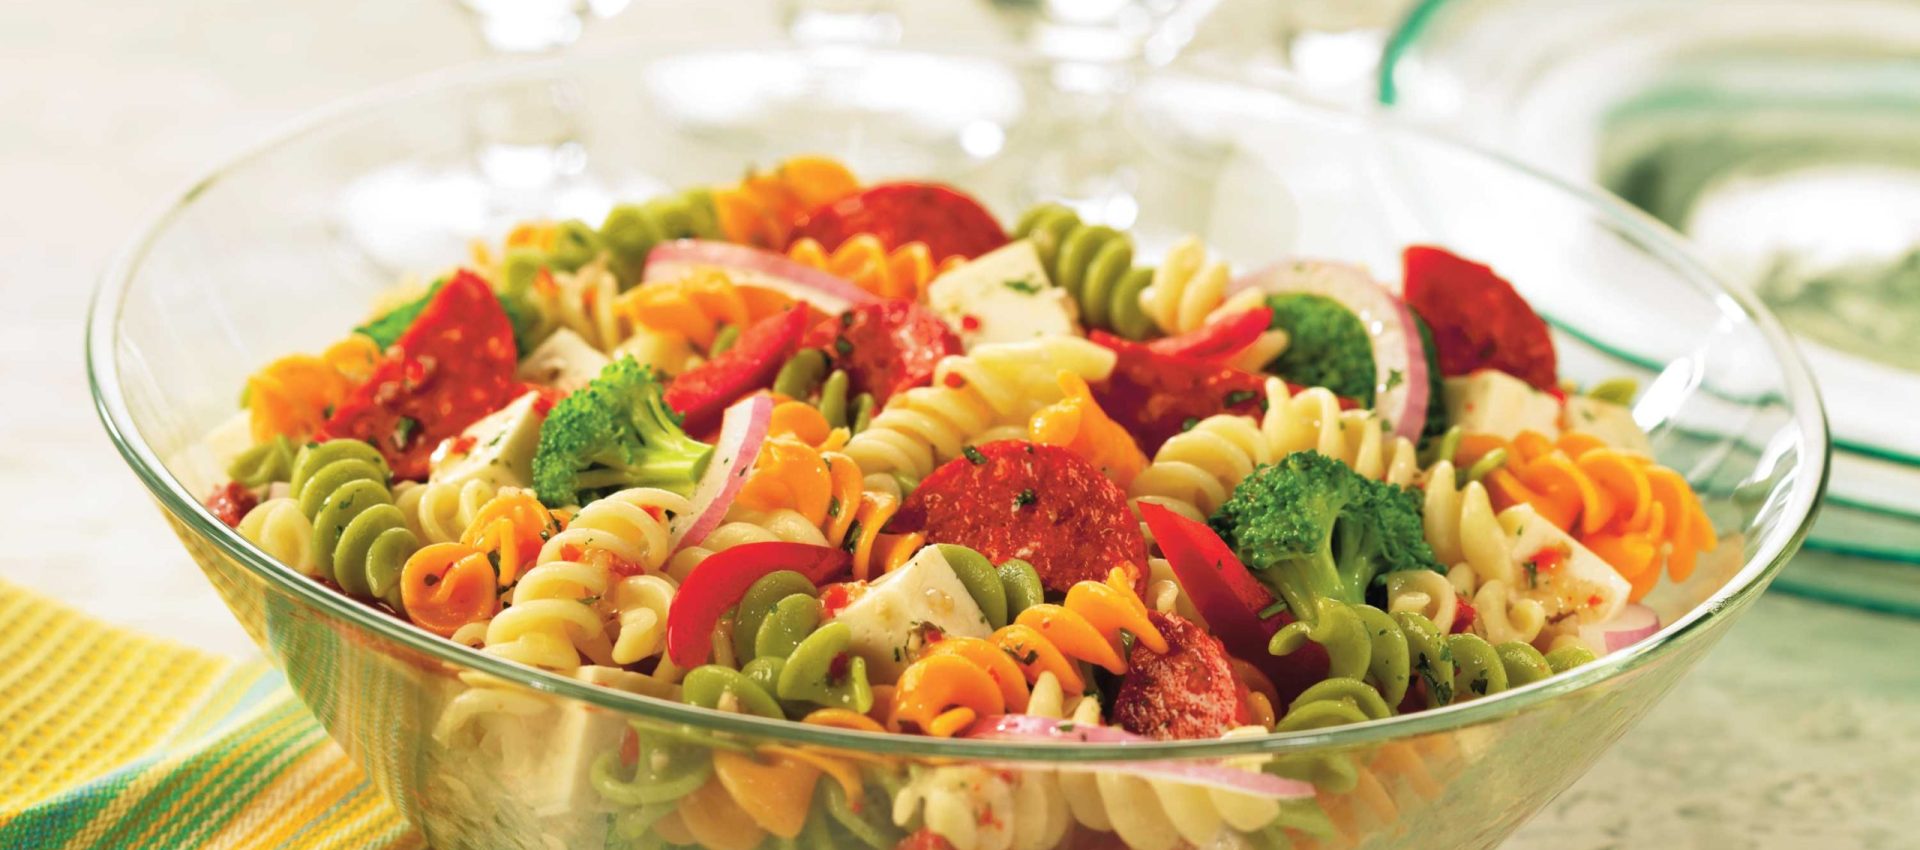 Pepperoni, mozzarella, and vegetables combine for an Italian-inspired pasta salad that’s easy and quick to pull together.